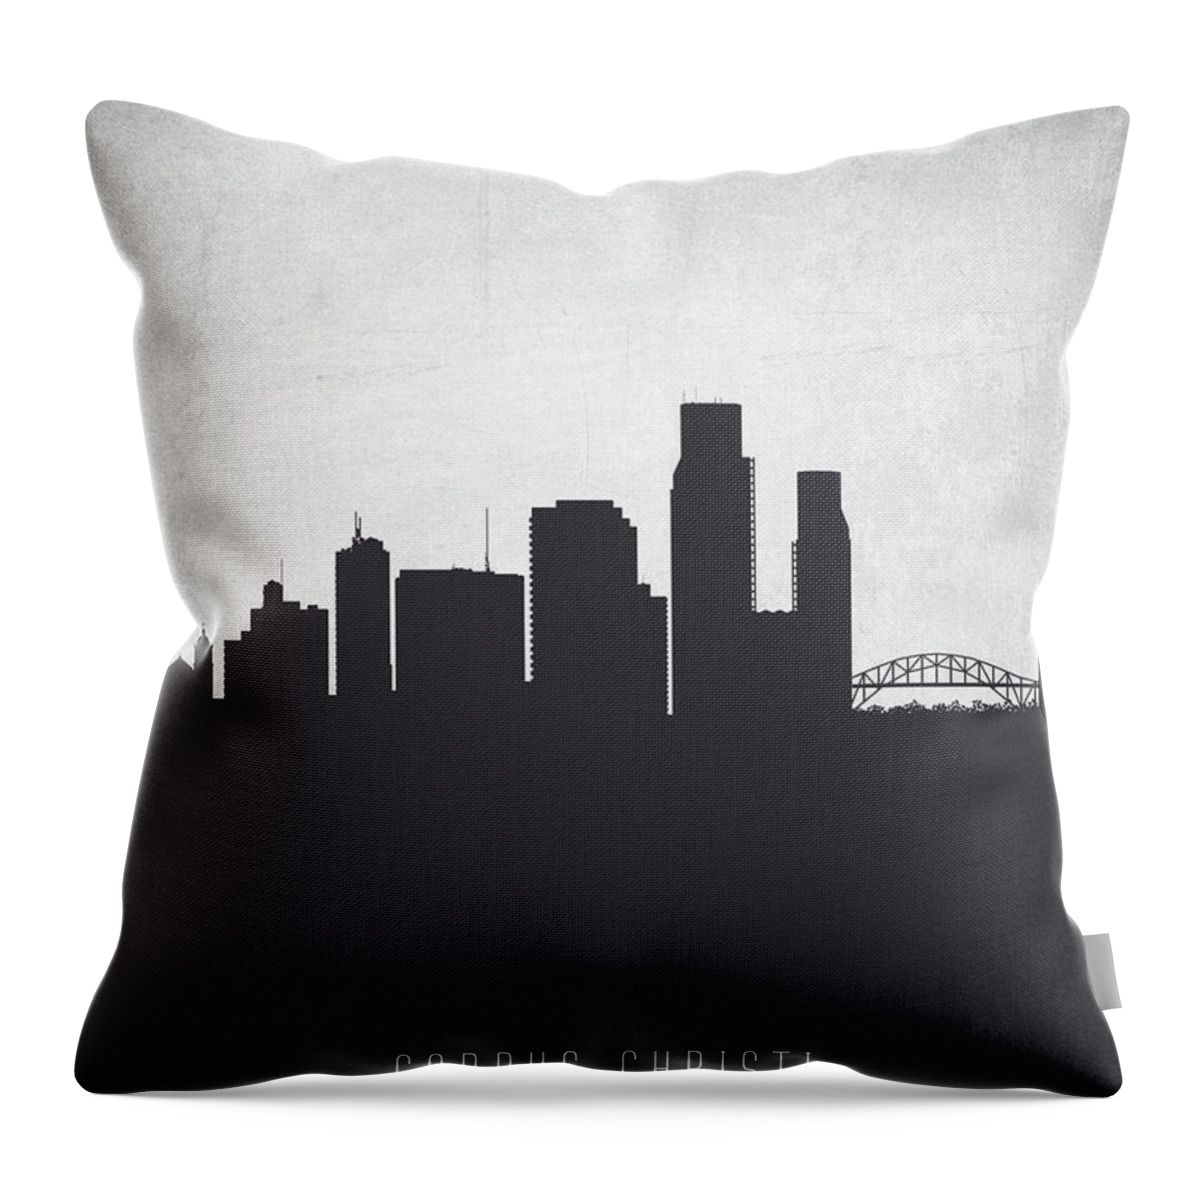 Corpus Christi Throw Pillow featuring the painting Corpus Christi Texas Cityscape 19 by Aged Pixel